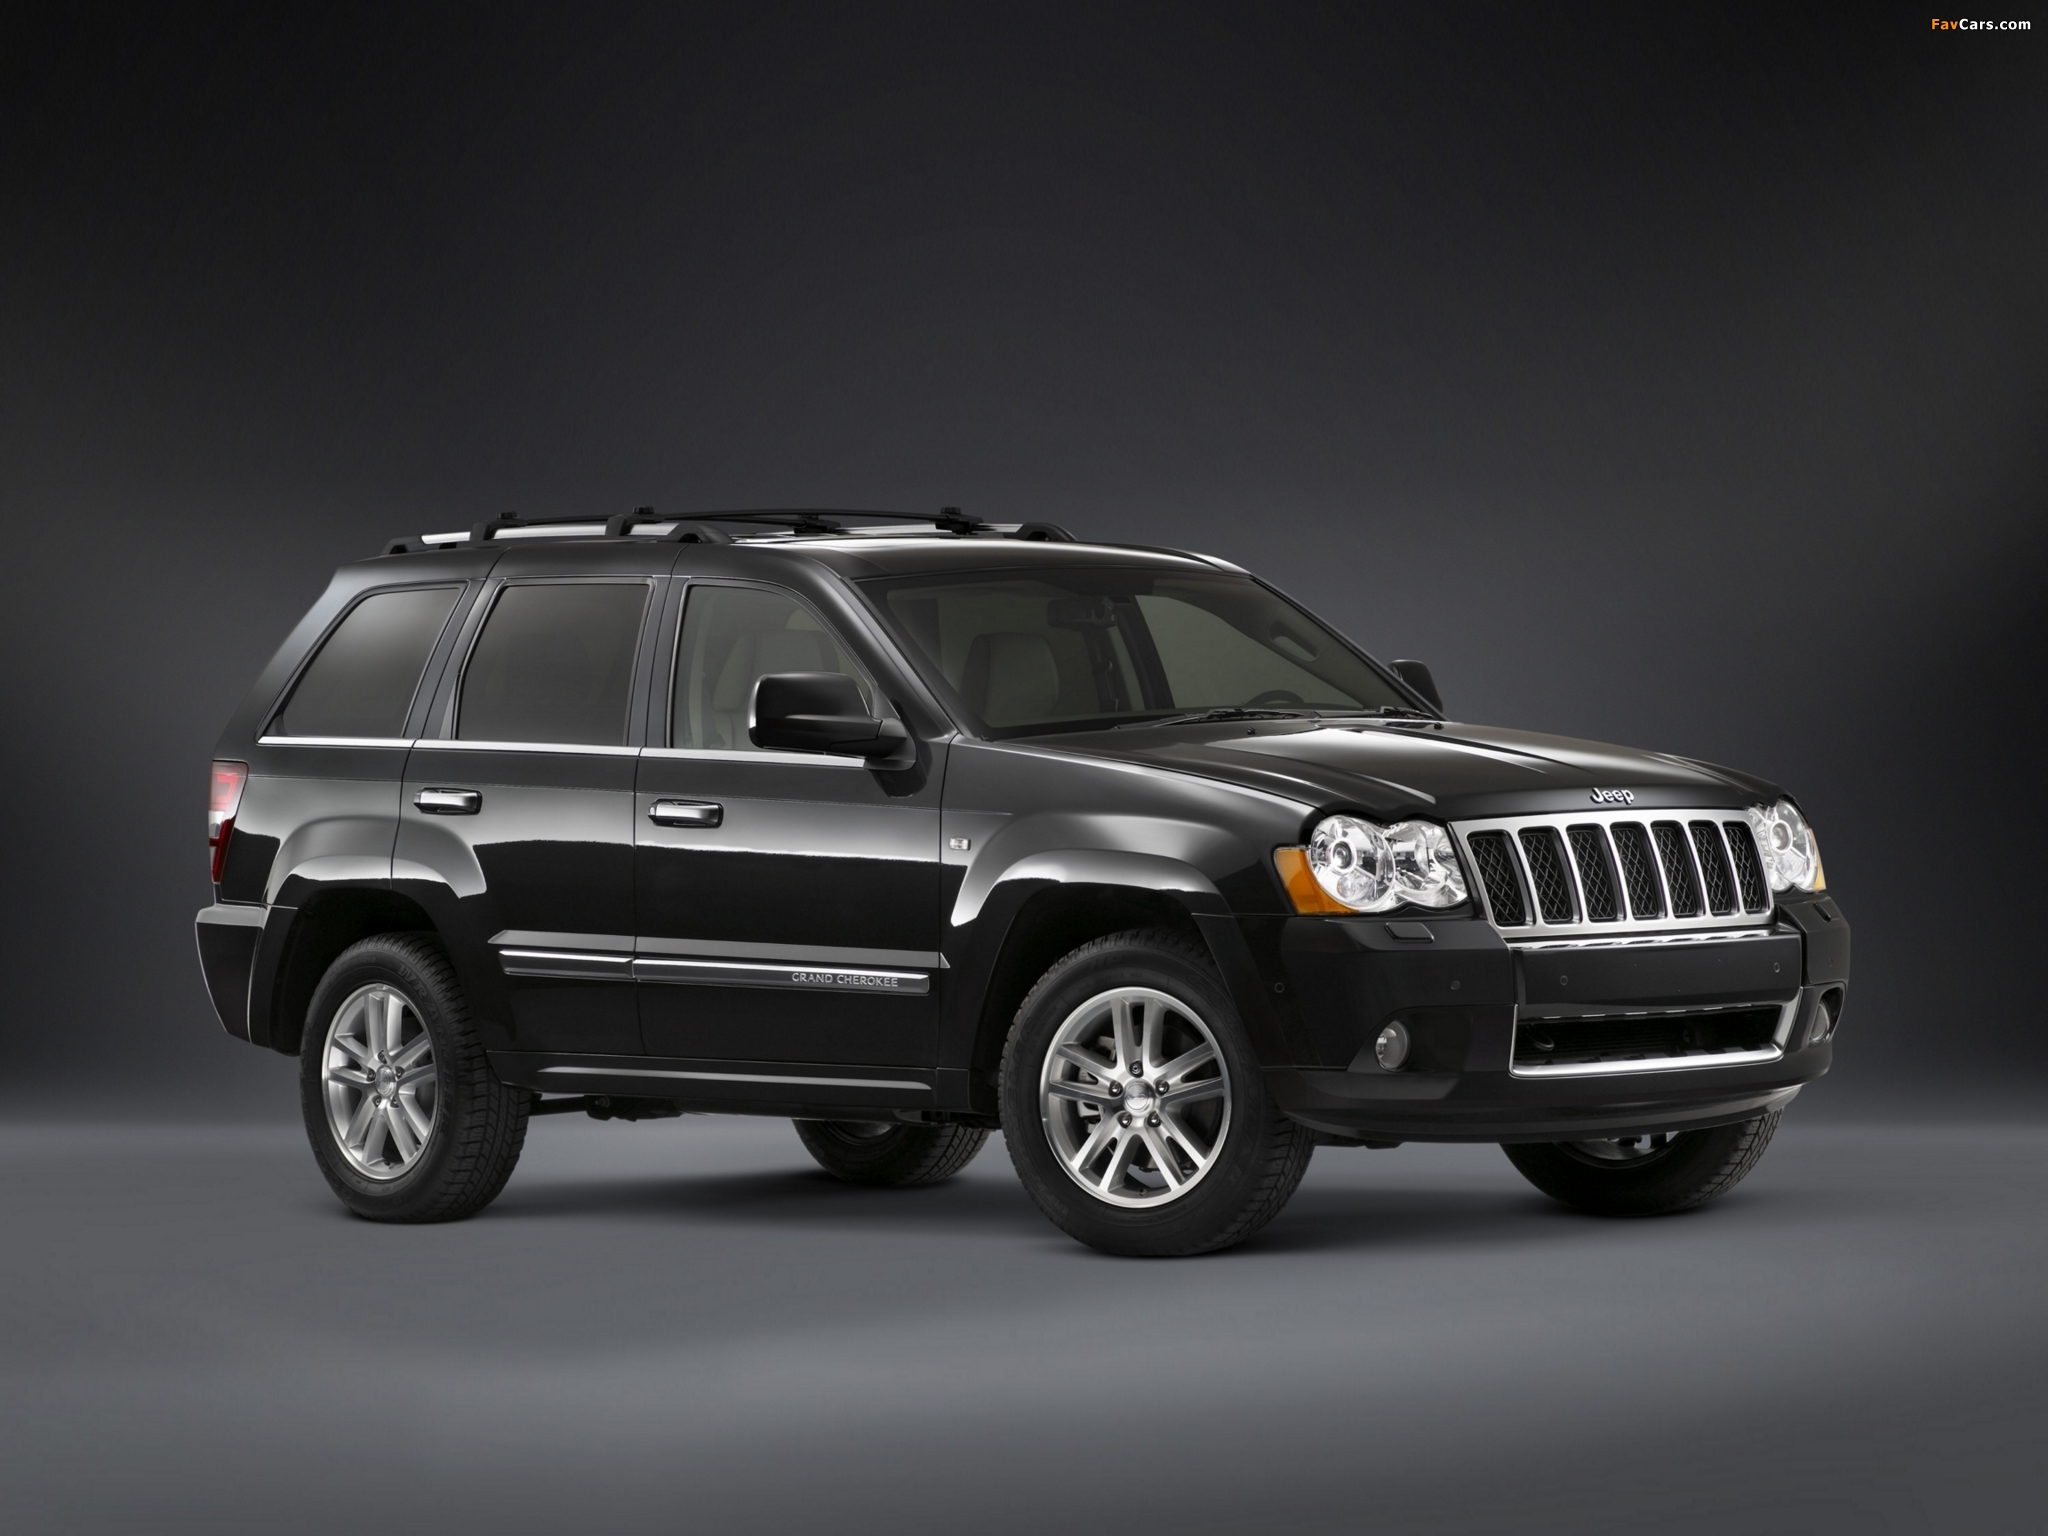 Jeep Grand Cherokee 5.7 Overland (WK) 200810 pictures